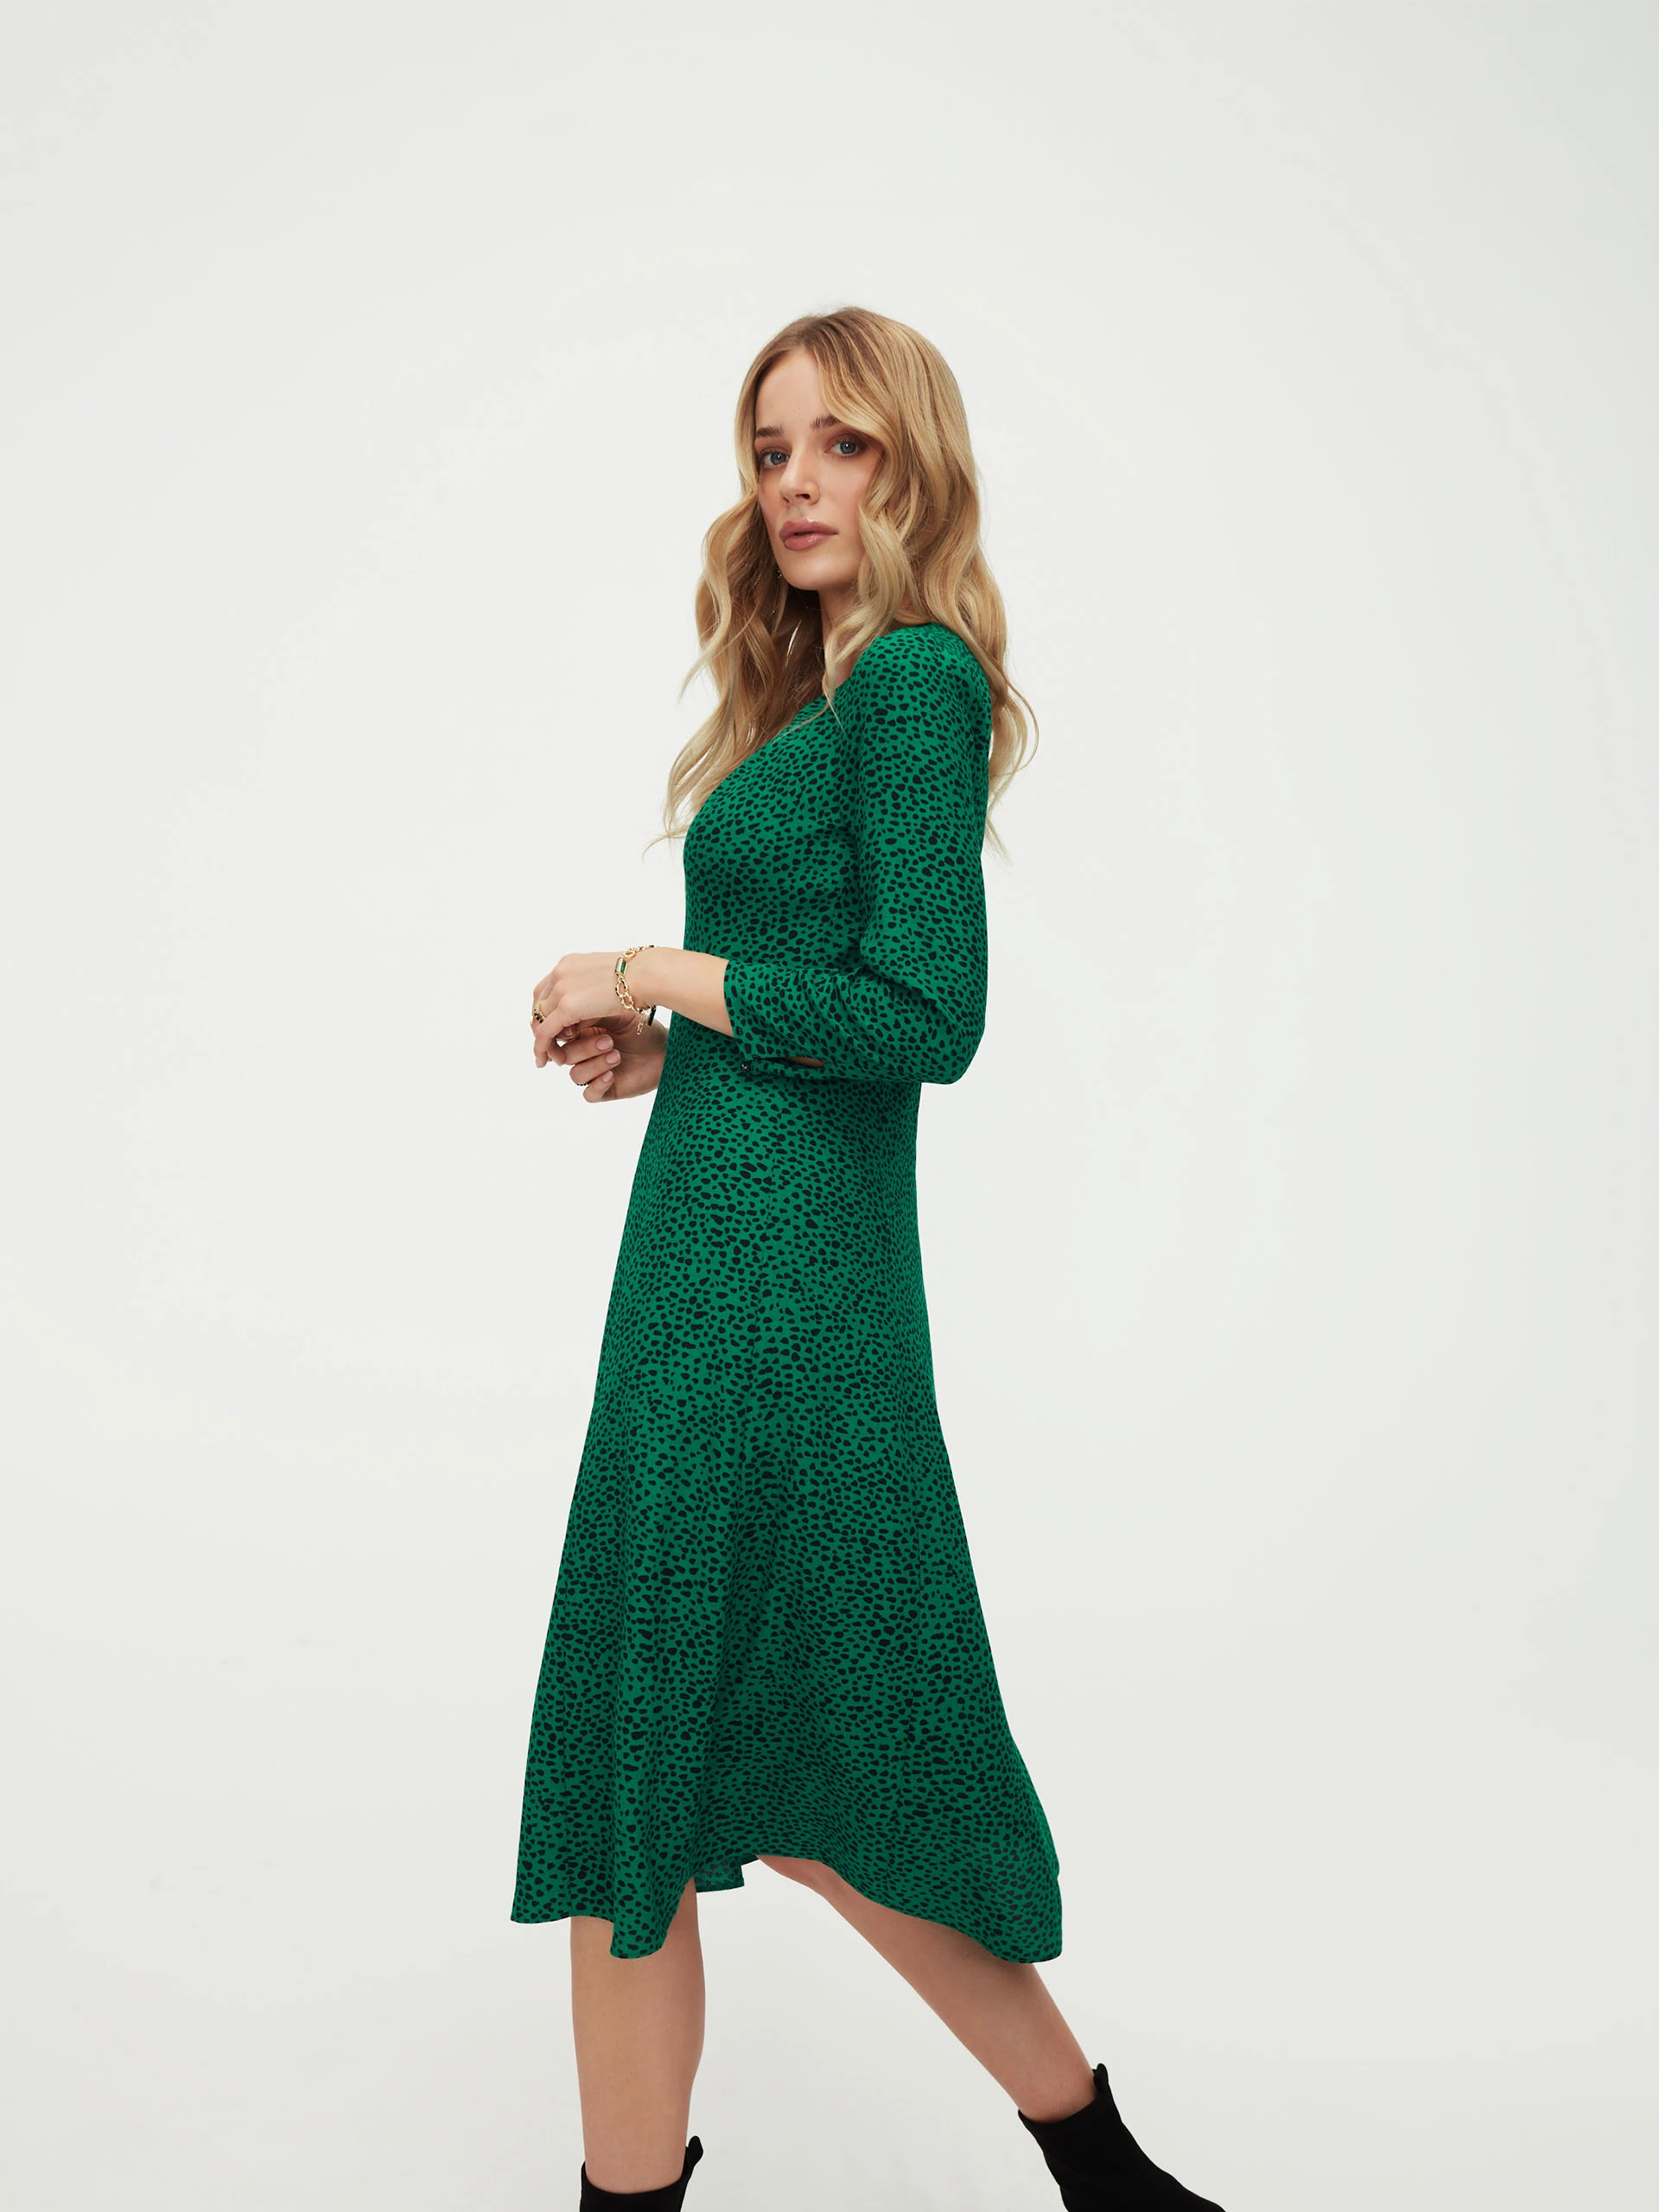 Green dress with delicate pattern